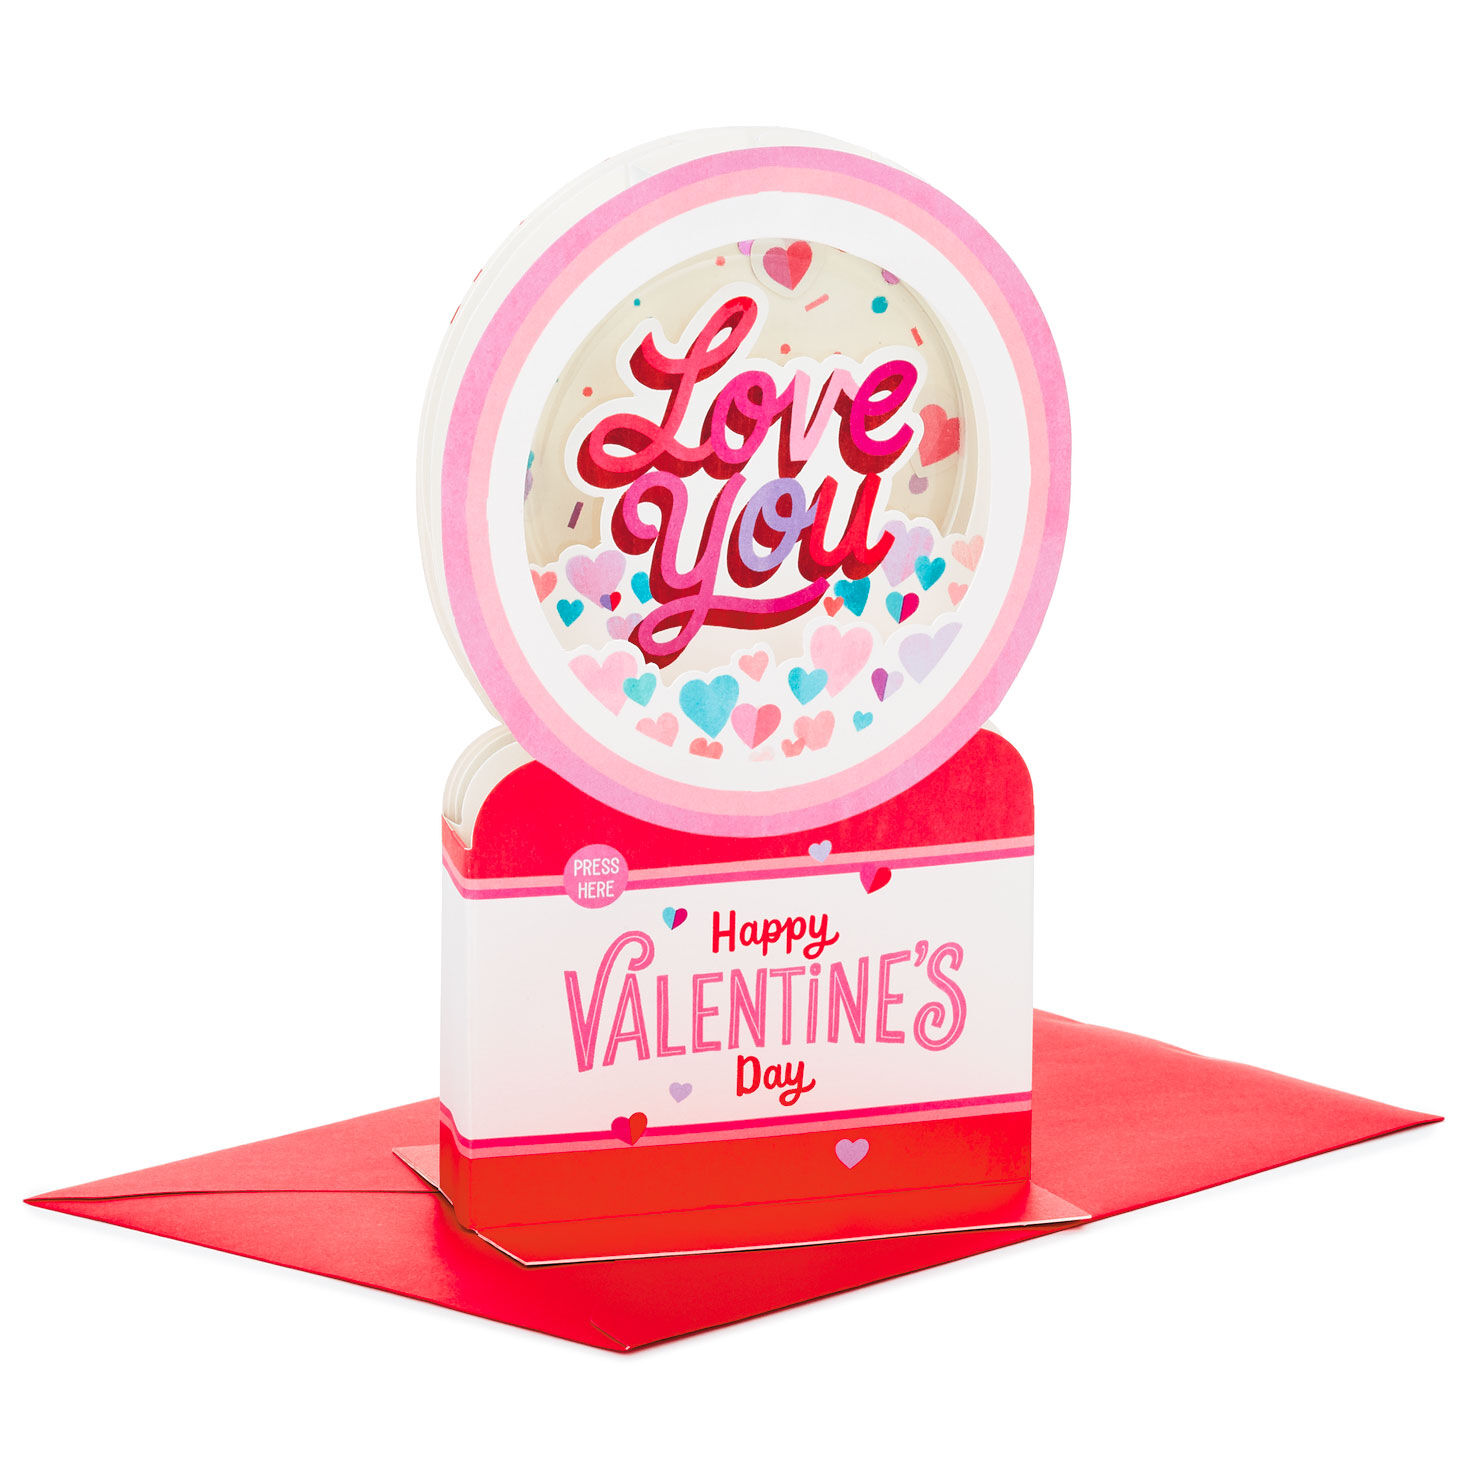 ContemporaryCute Illustrated Design Valentine Card for The One I Love from Hallmark 